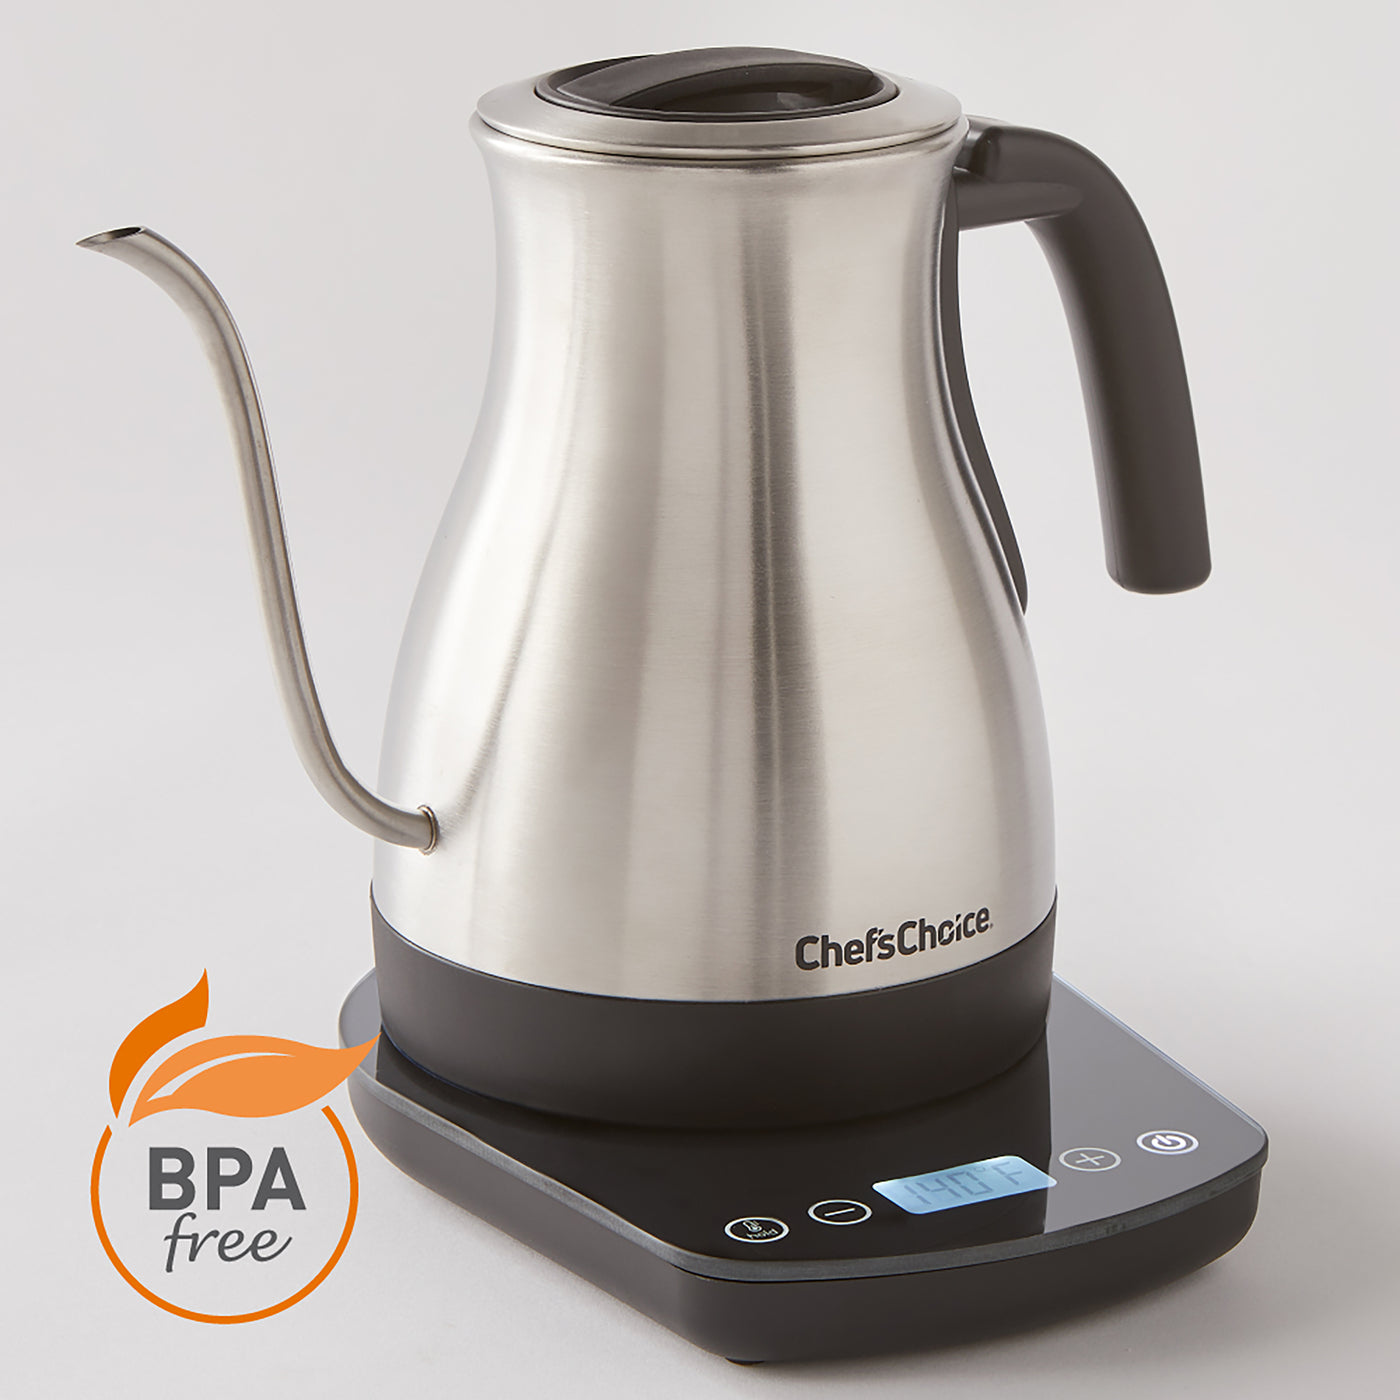 Best Electric Kettle 2021: Cosori Electric Gooseneck Kettle Review